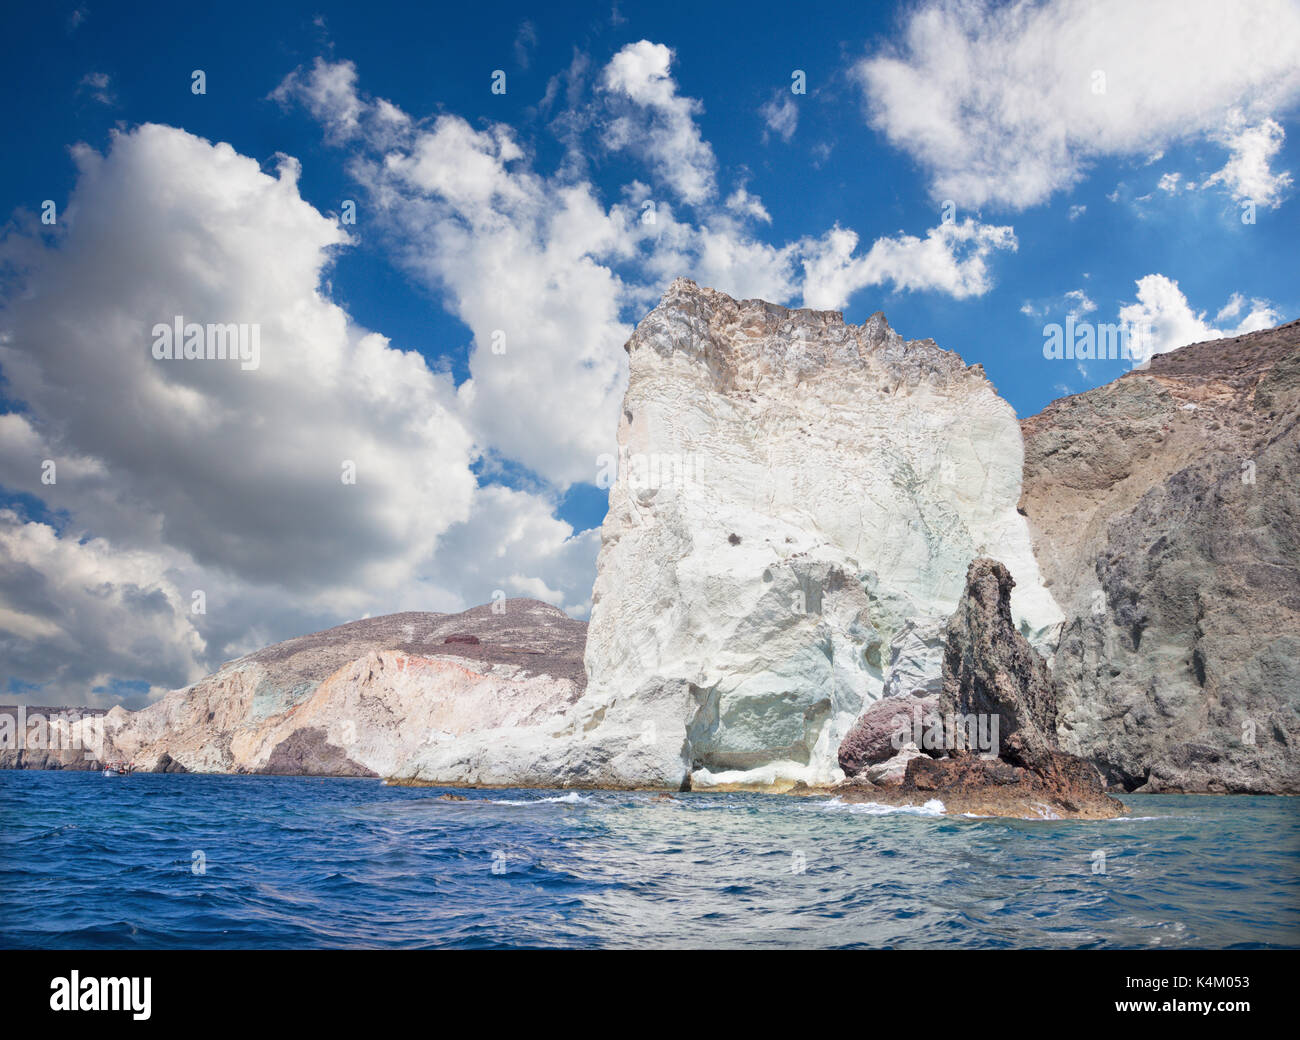 Santorini - The white rock towers from south part of the island. Stock Photo